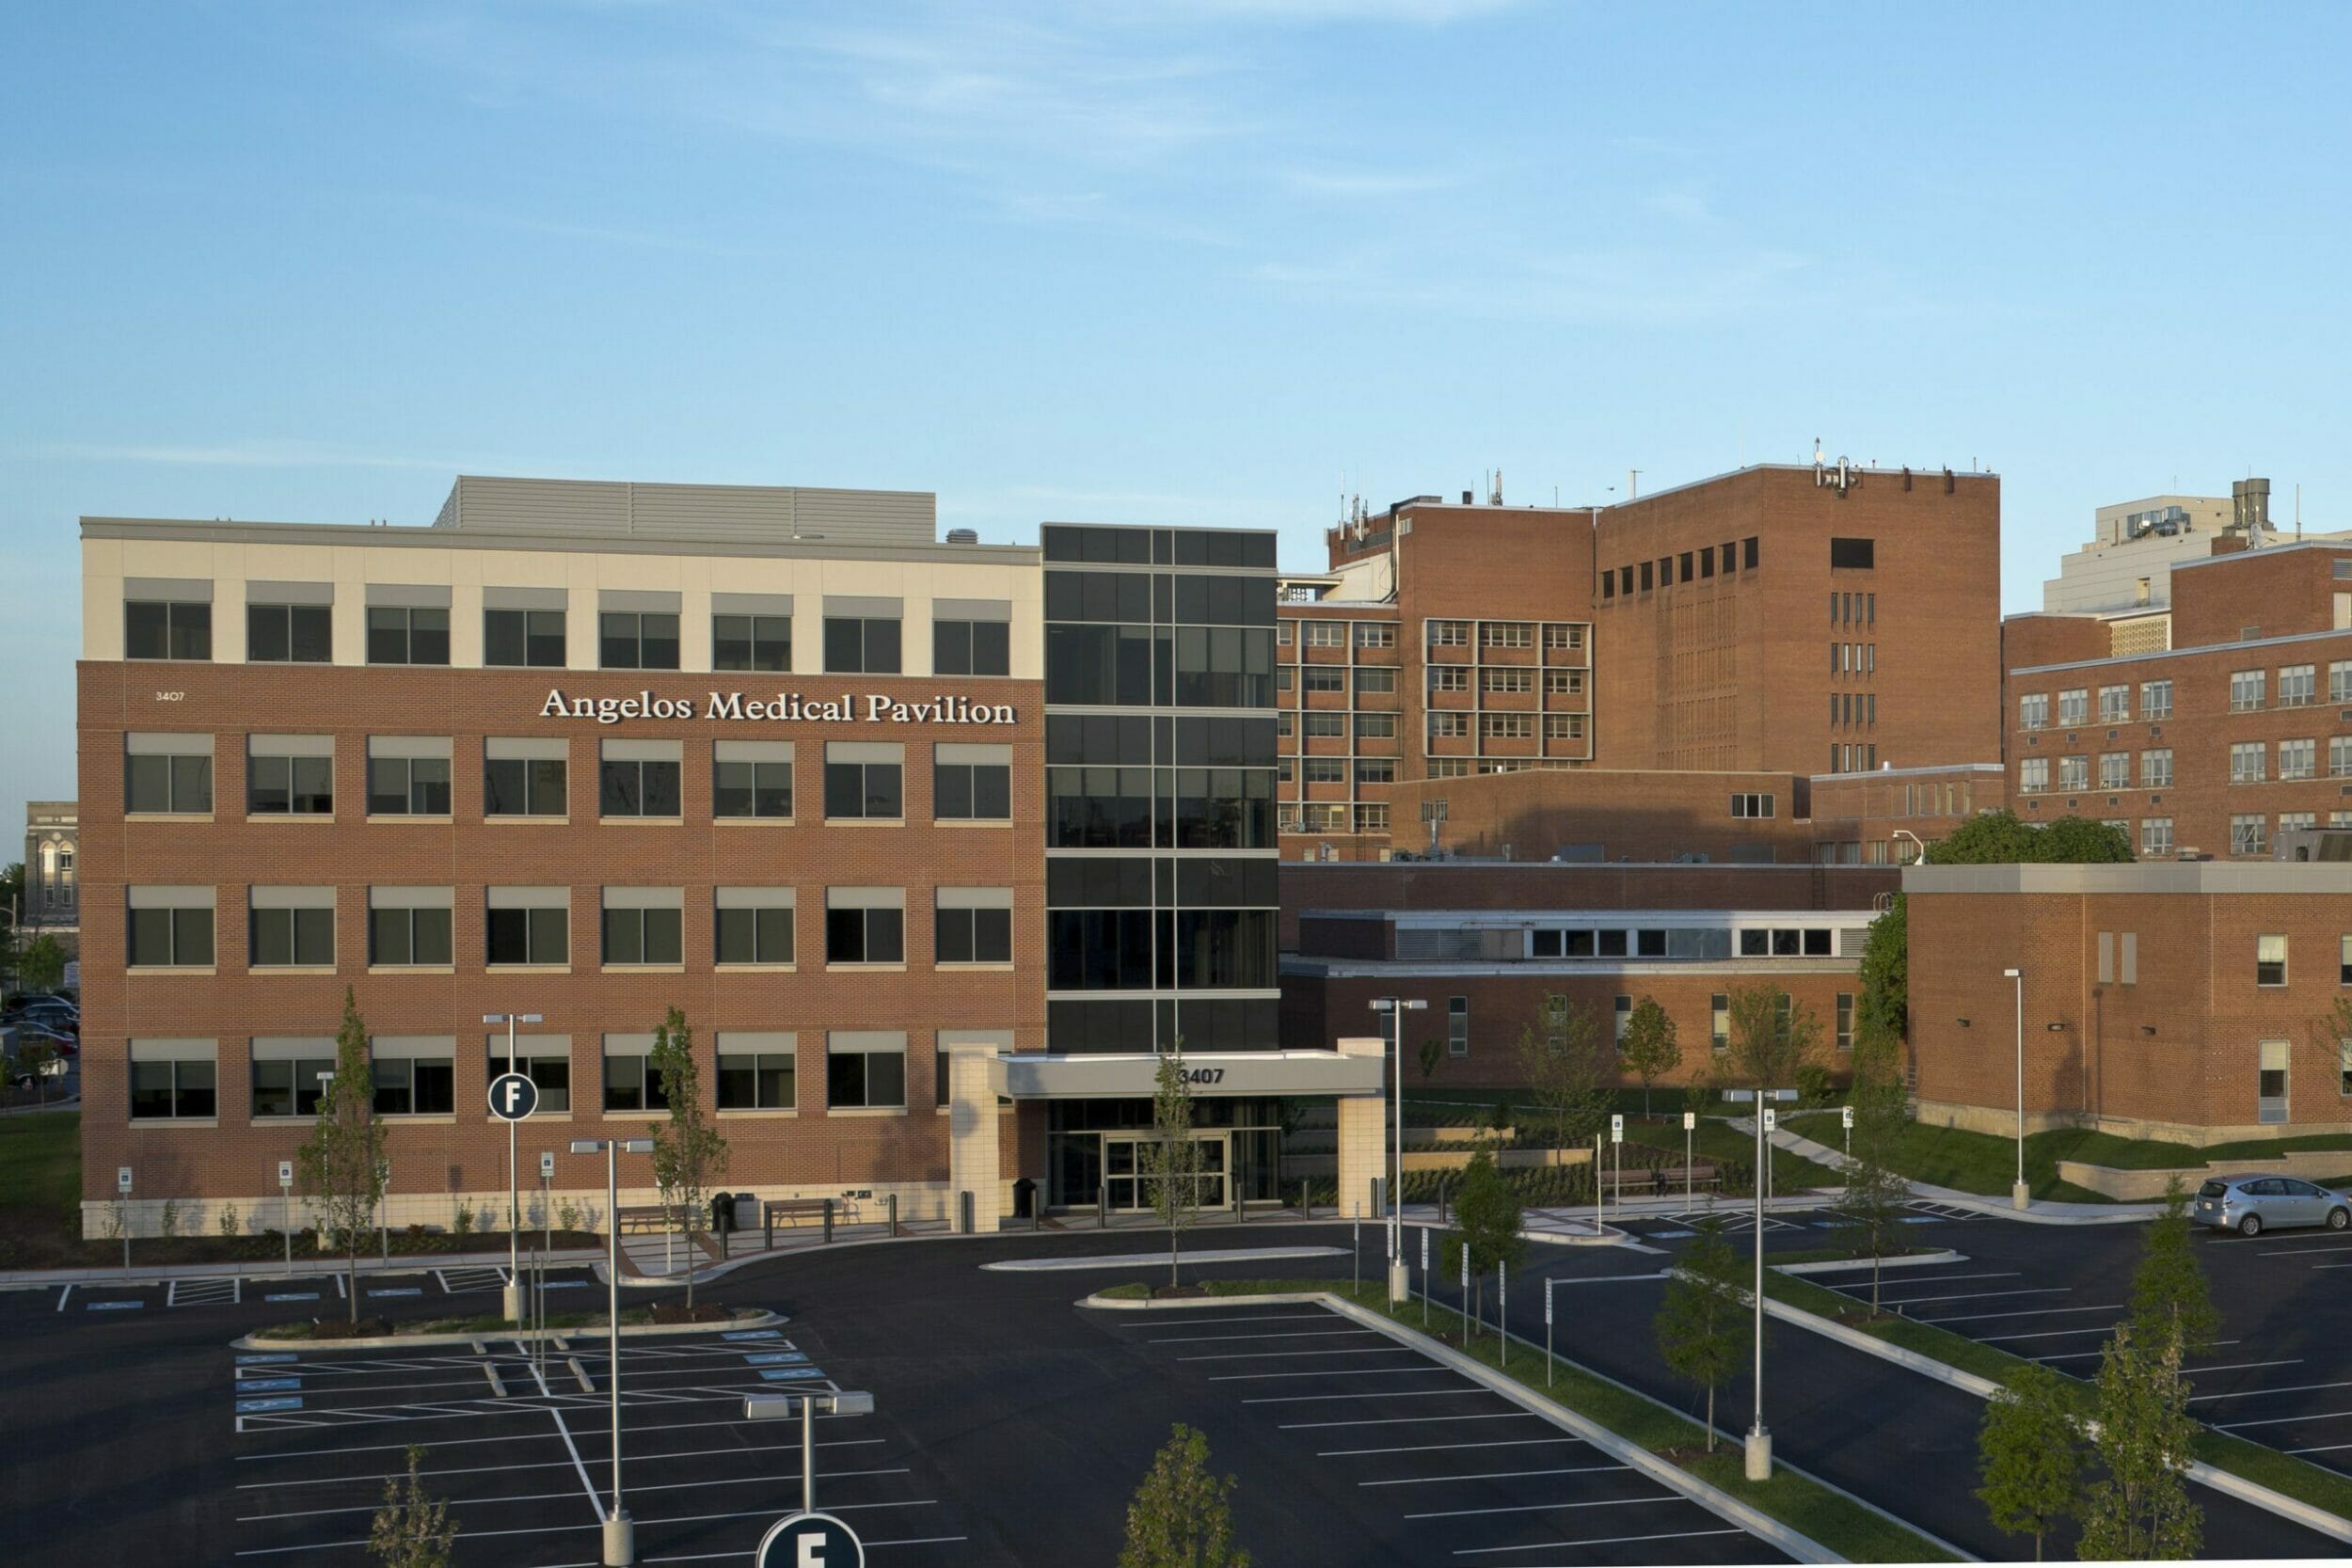 Exterior view of Angelos Medical Pavilion with a brick exterior and aerial view of the parking lot in front